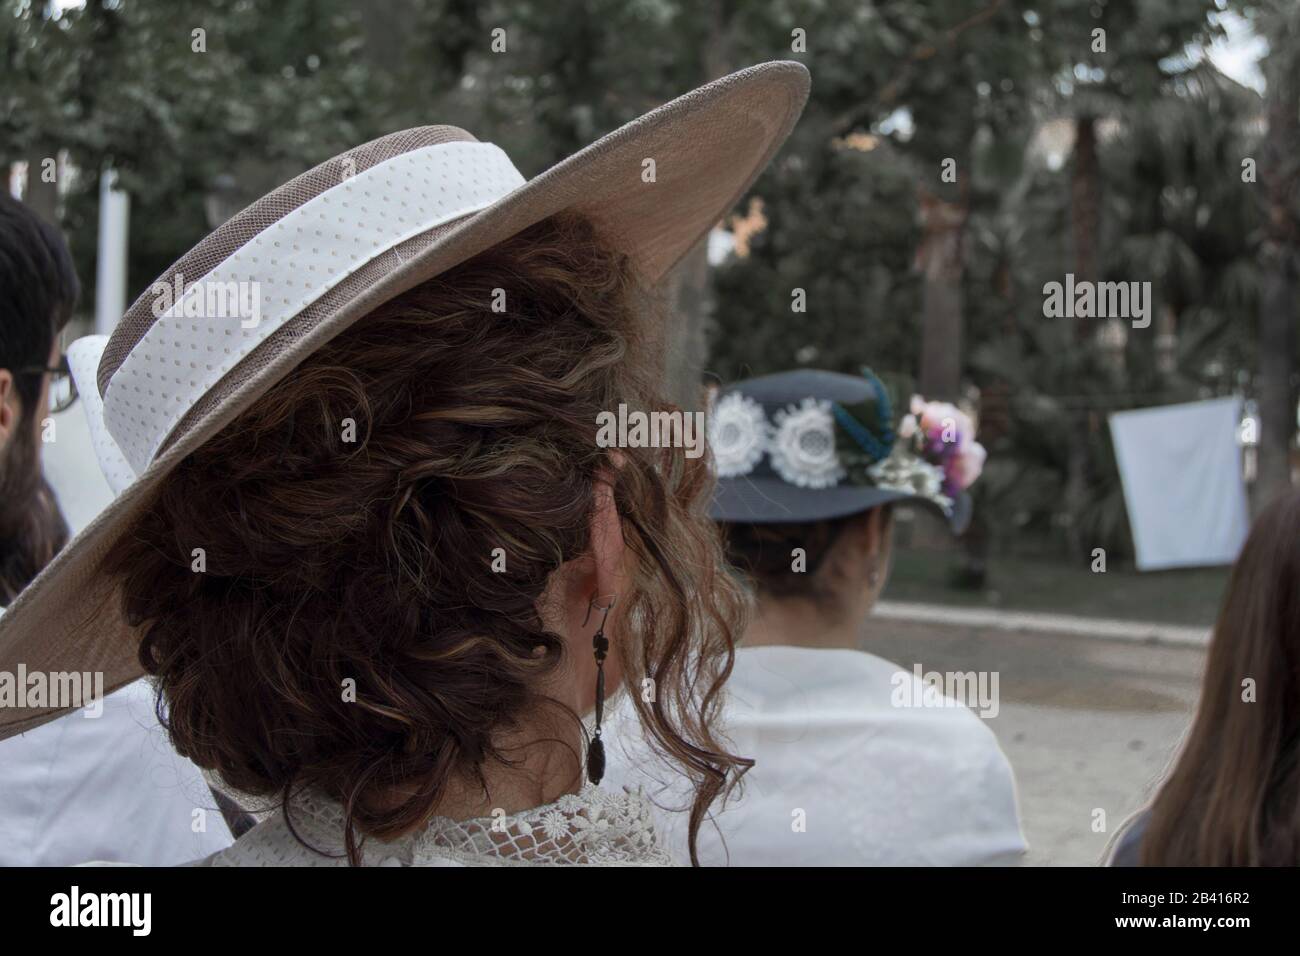 Woman with hat of the modernism era 1890s Stock Photo